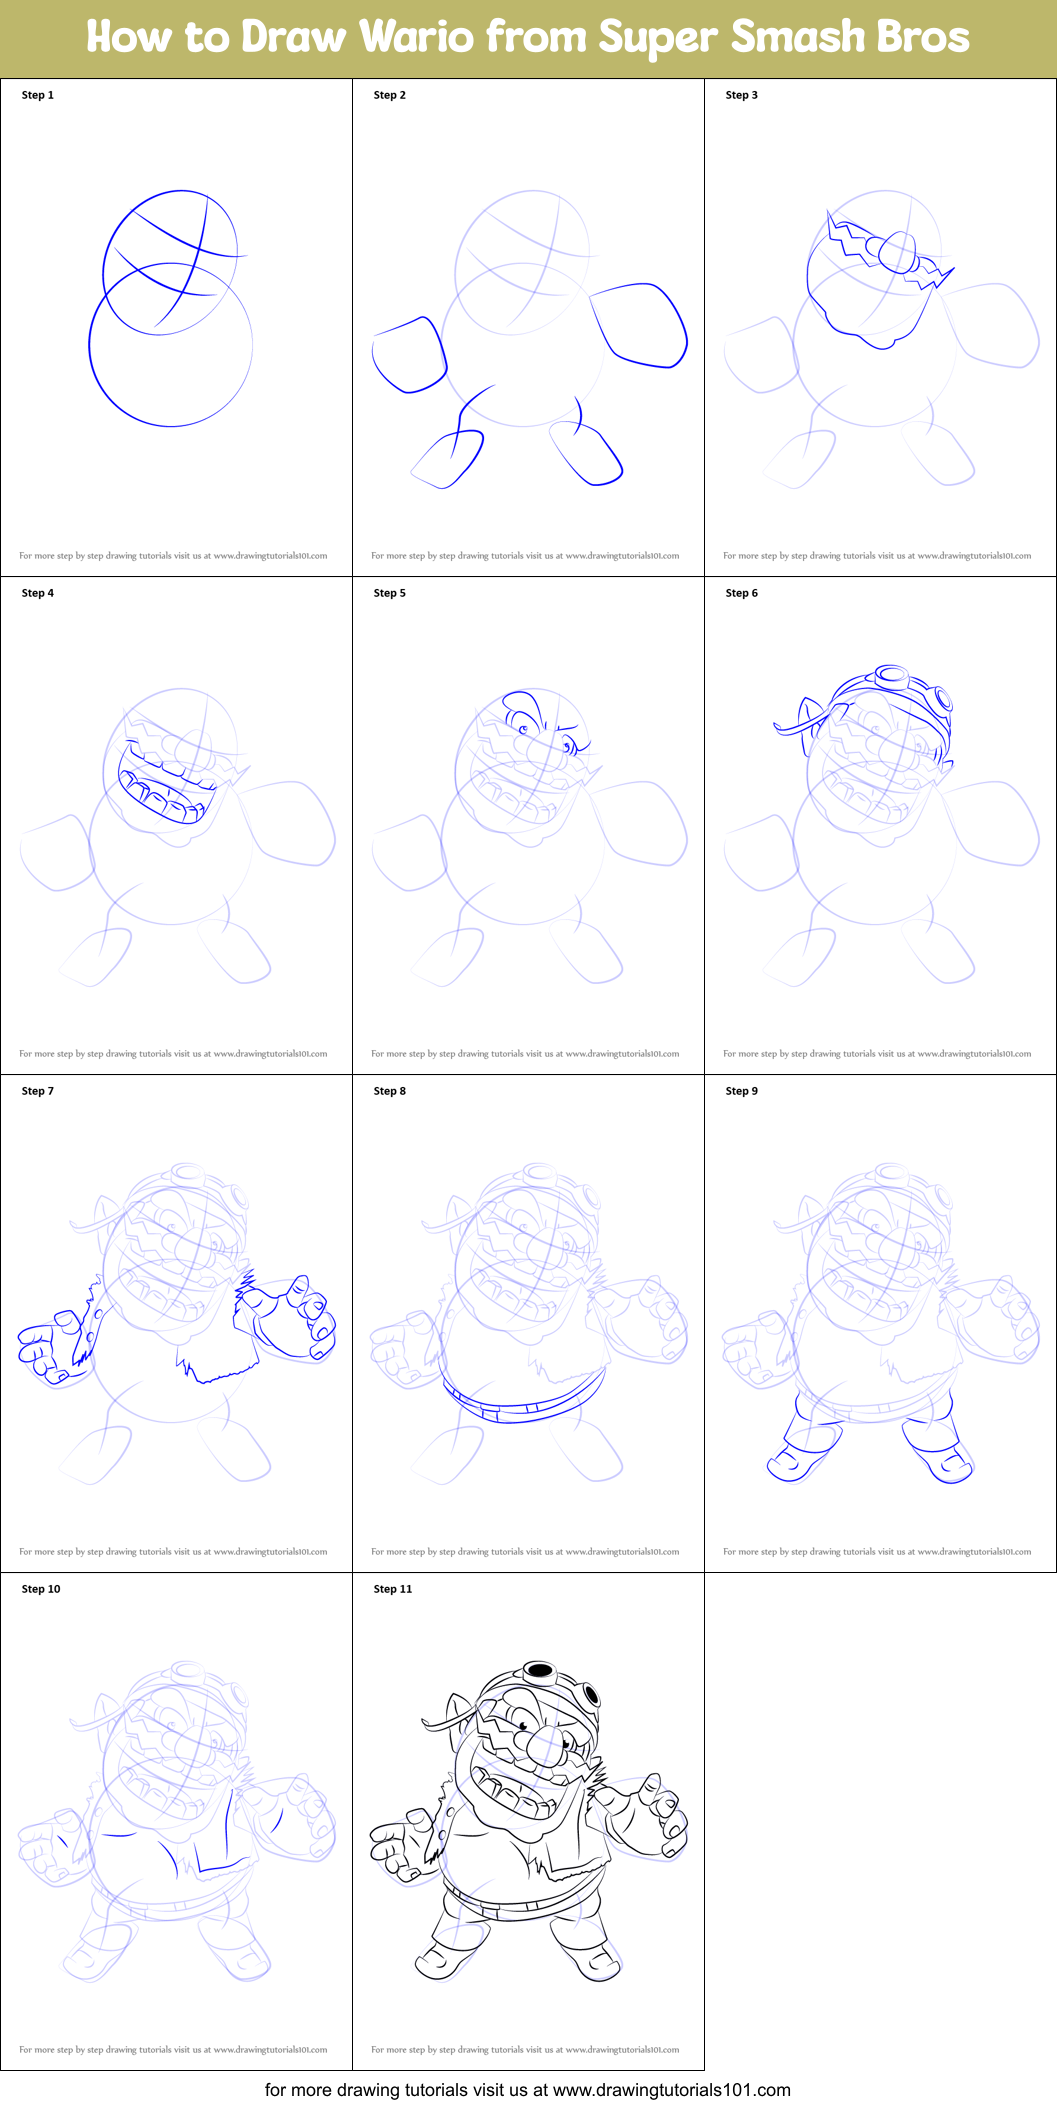 How to Draw Wario from Super Smash Bros (Super Smash Bros.) Step by ...